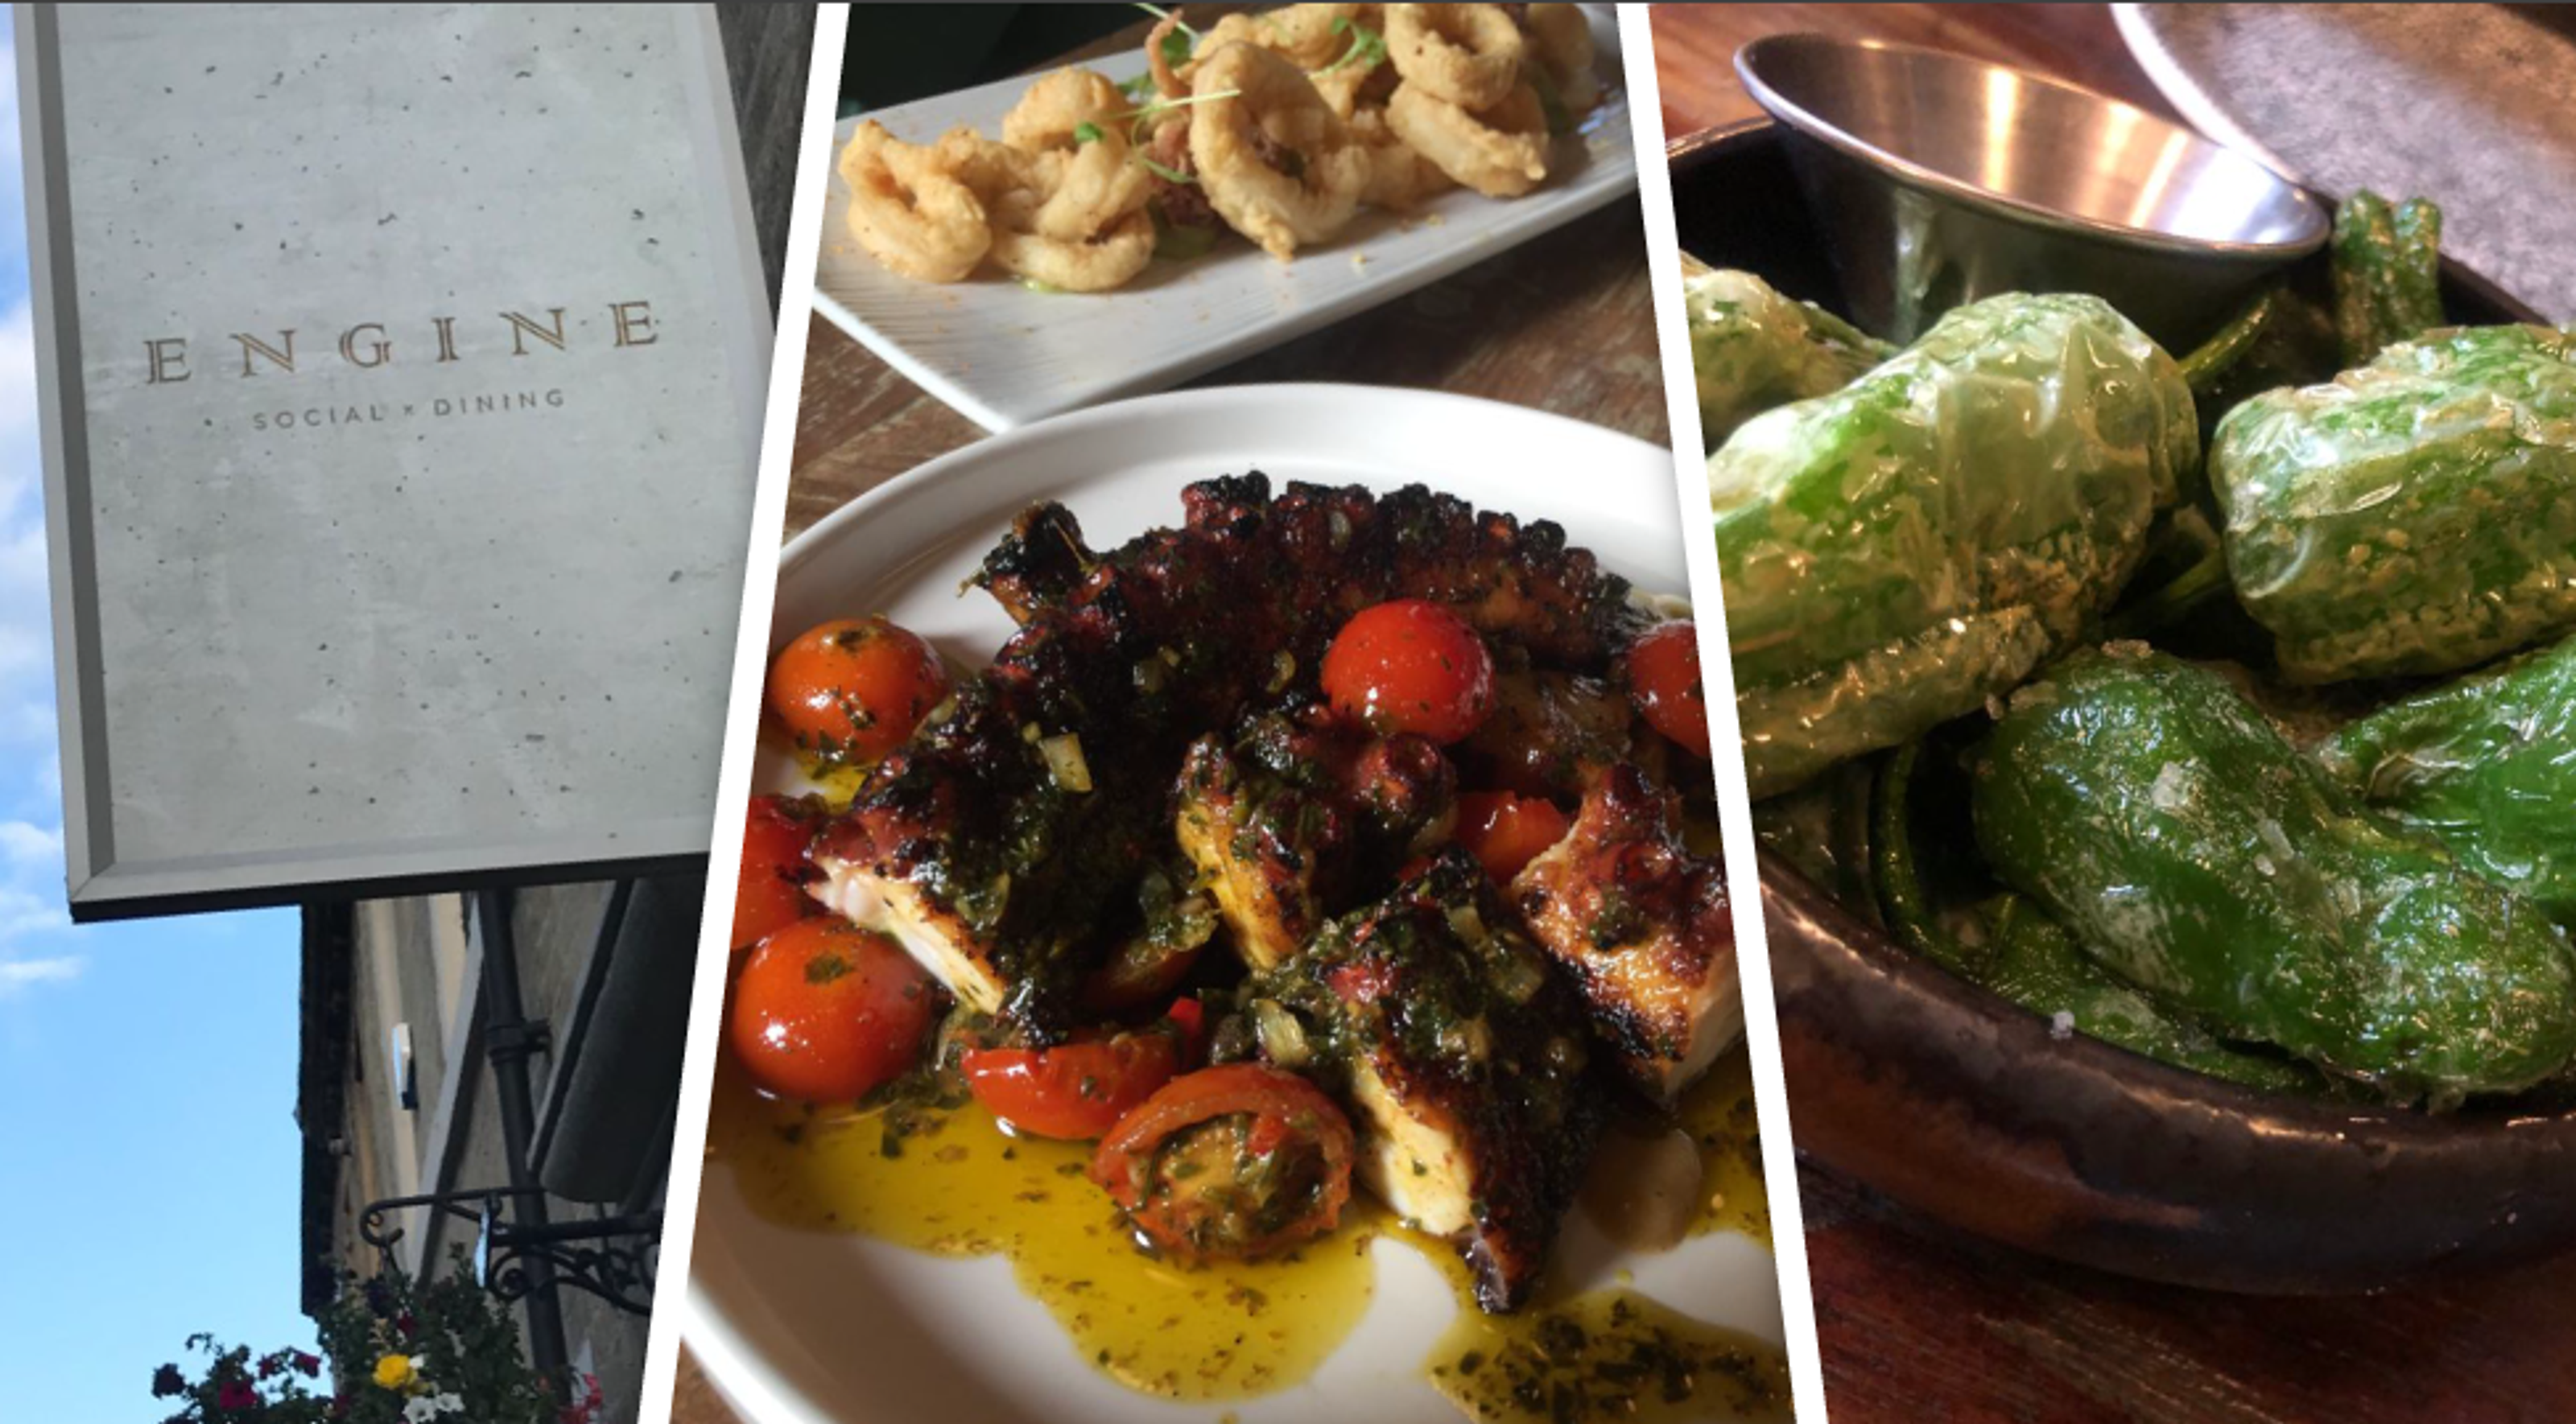 Montage of photos including Engine Room signage, plate of octopus and padron peppers